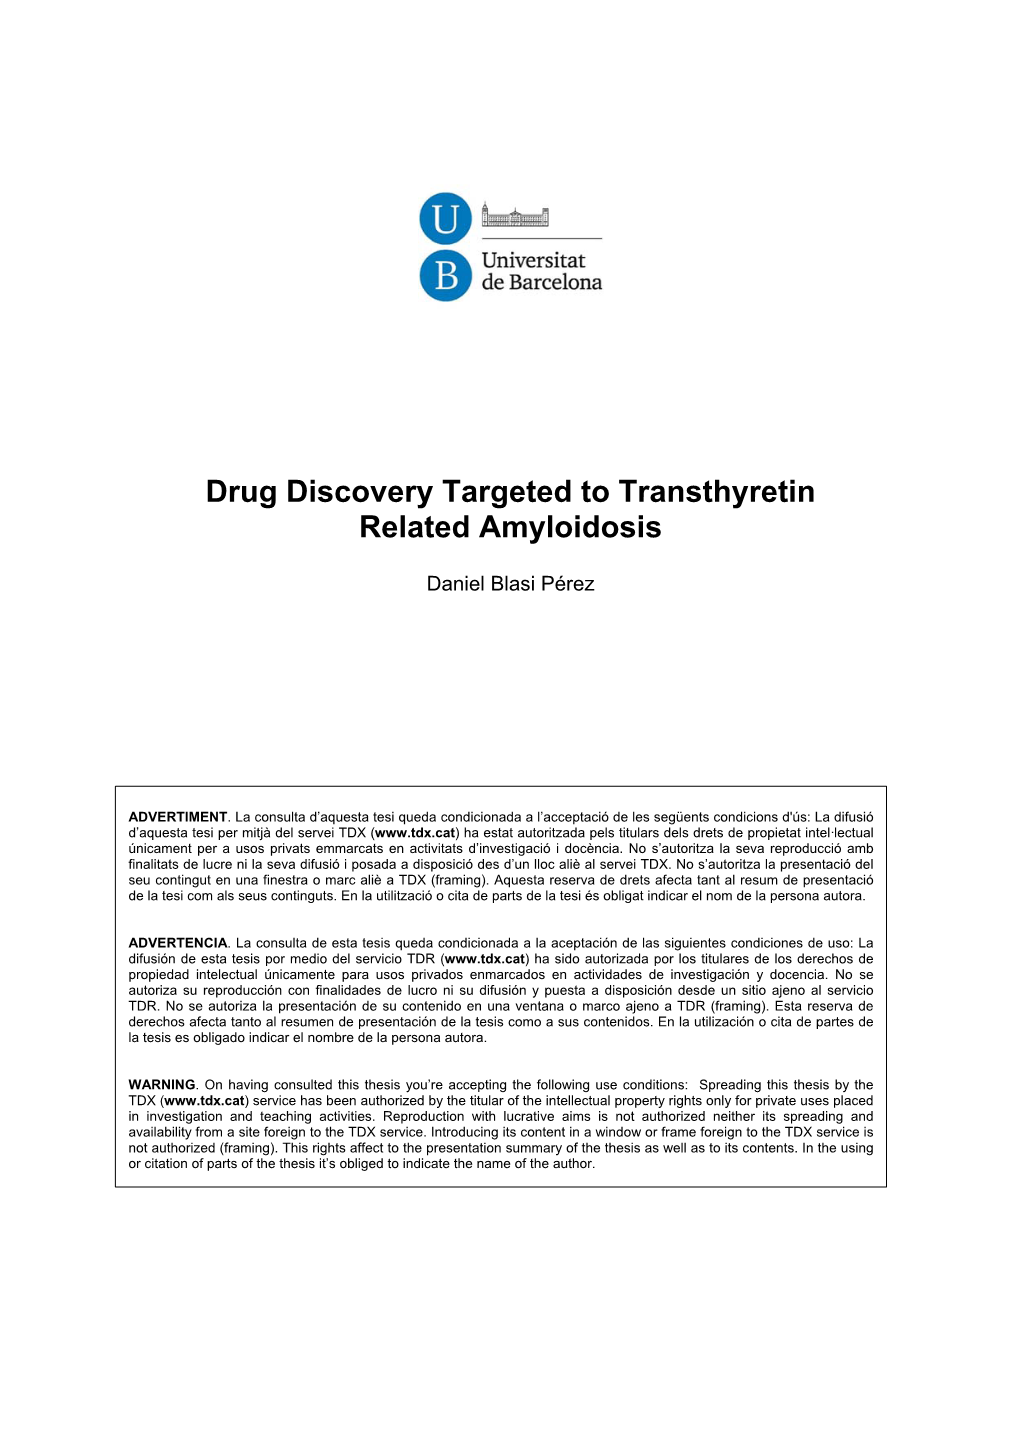 Drug Discovery Targeted to Transthyretin Related Amyloidosis